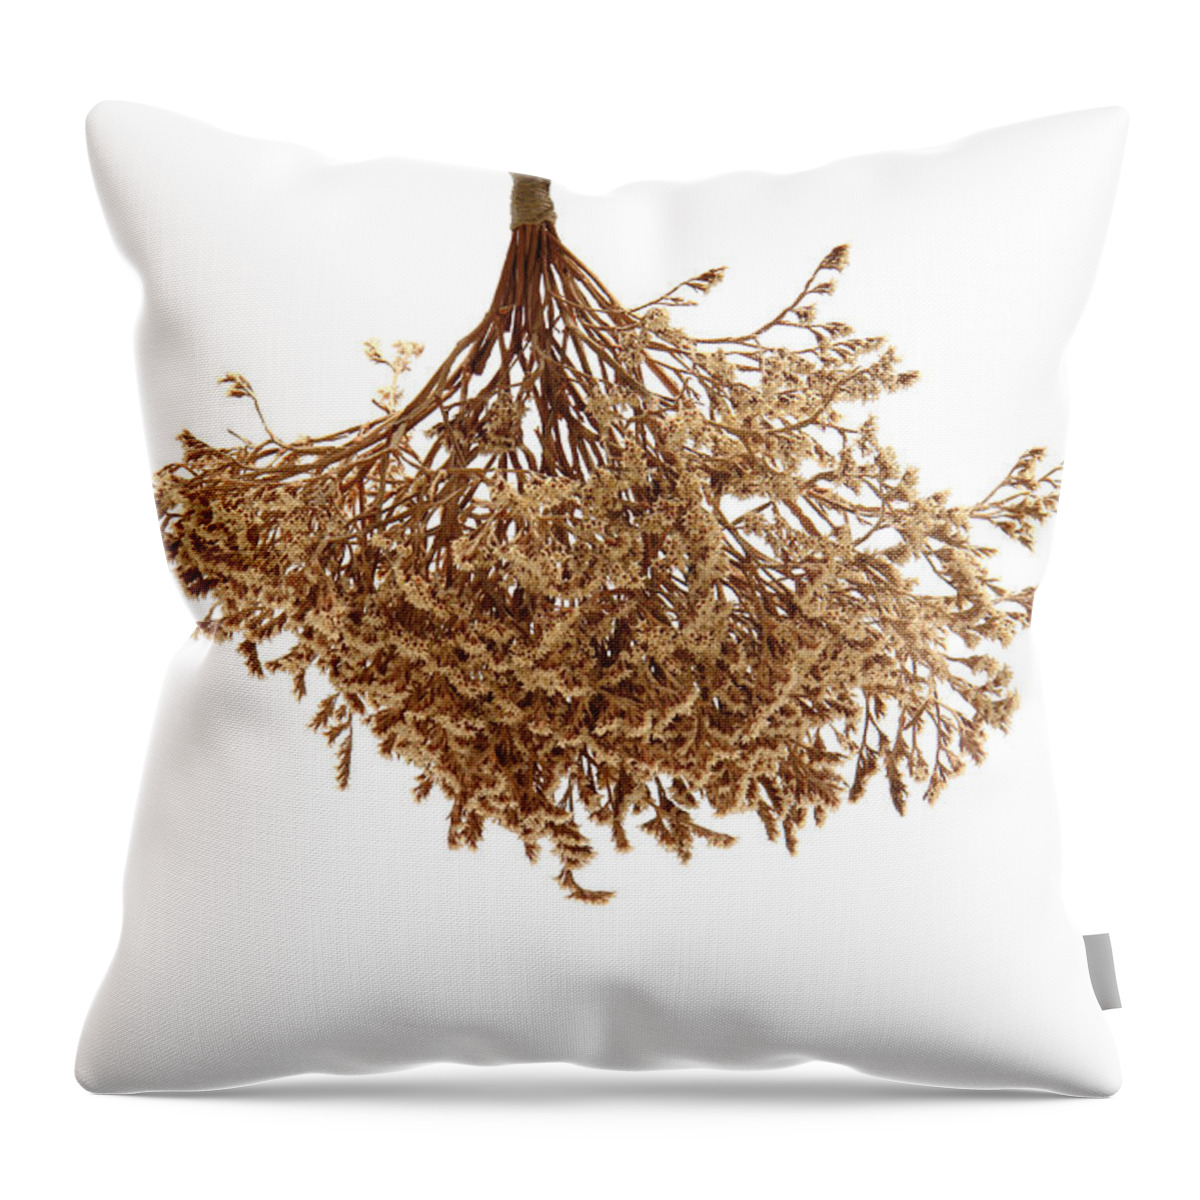 Flower Throw Pillow featuring the photograph Hanging Dried Flowers Bunch #6 by Olivier Le Queinec